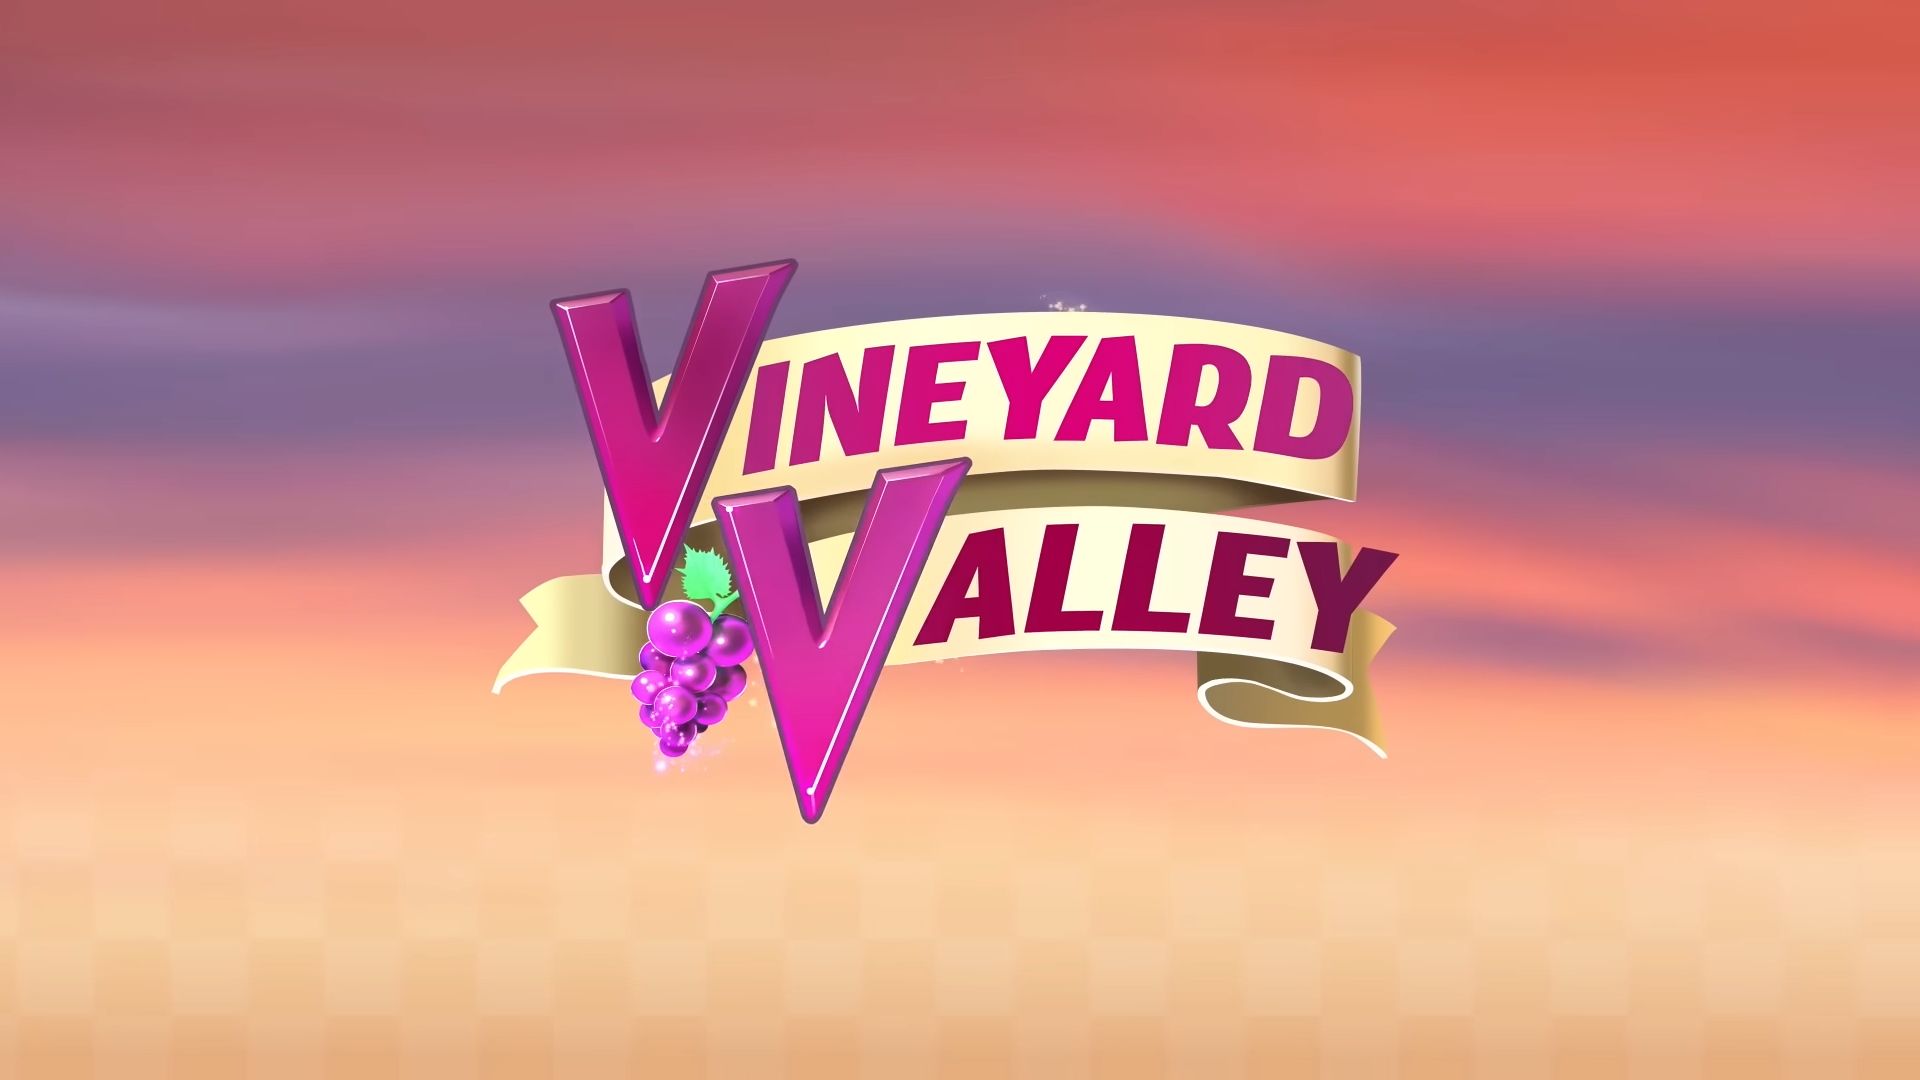 Full version of Android Logic game apk Vineyard Valley NETFLIX for tablet and phone.